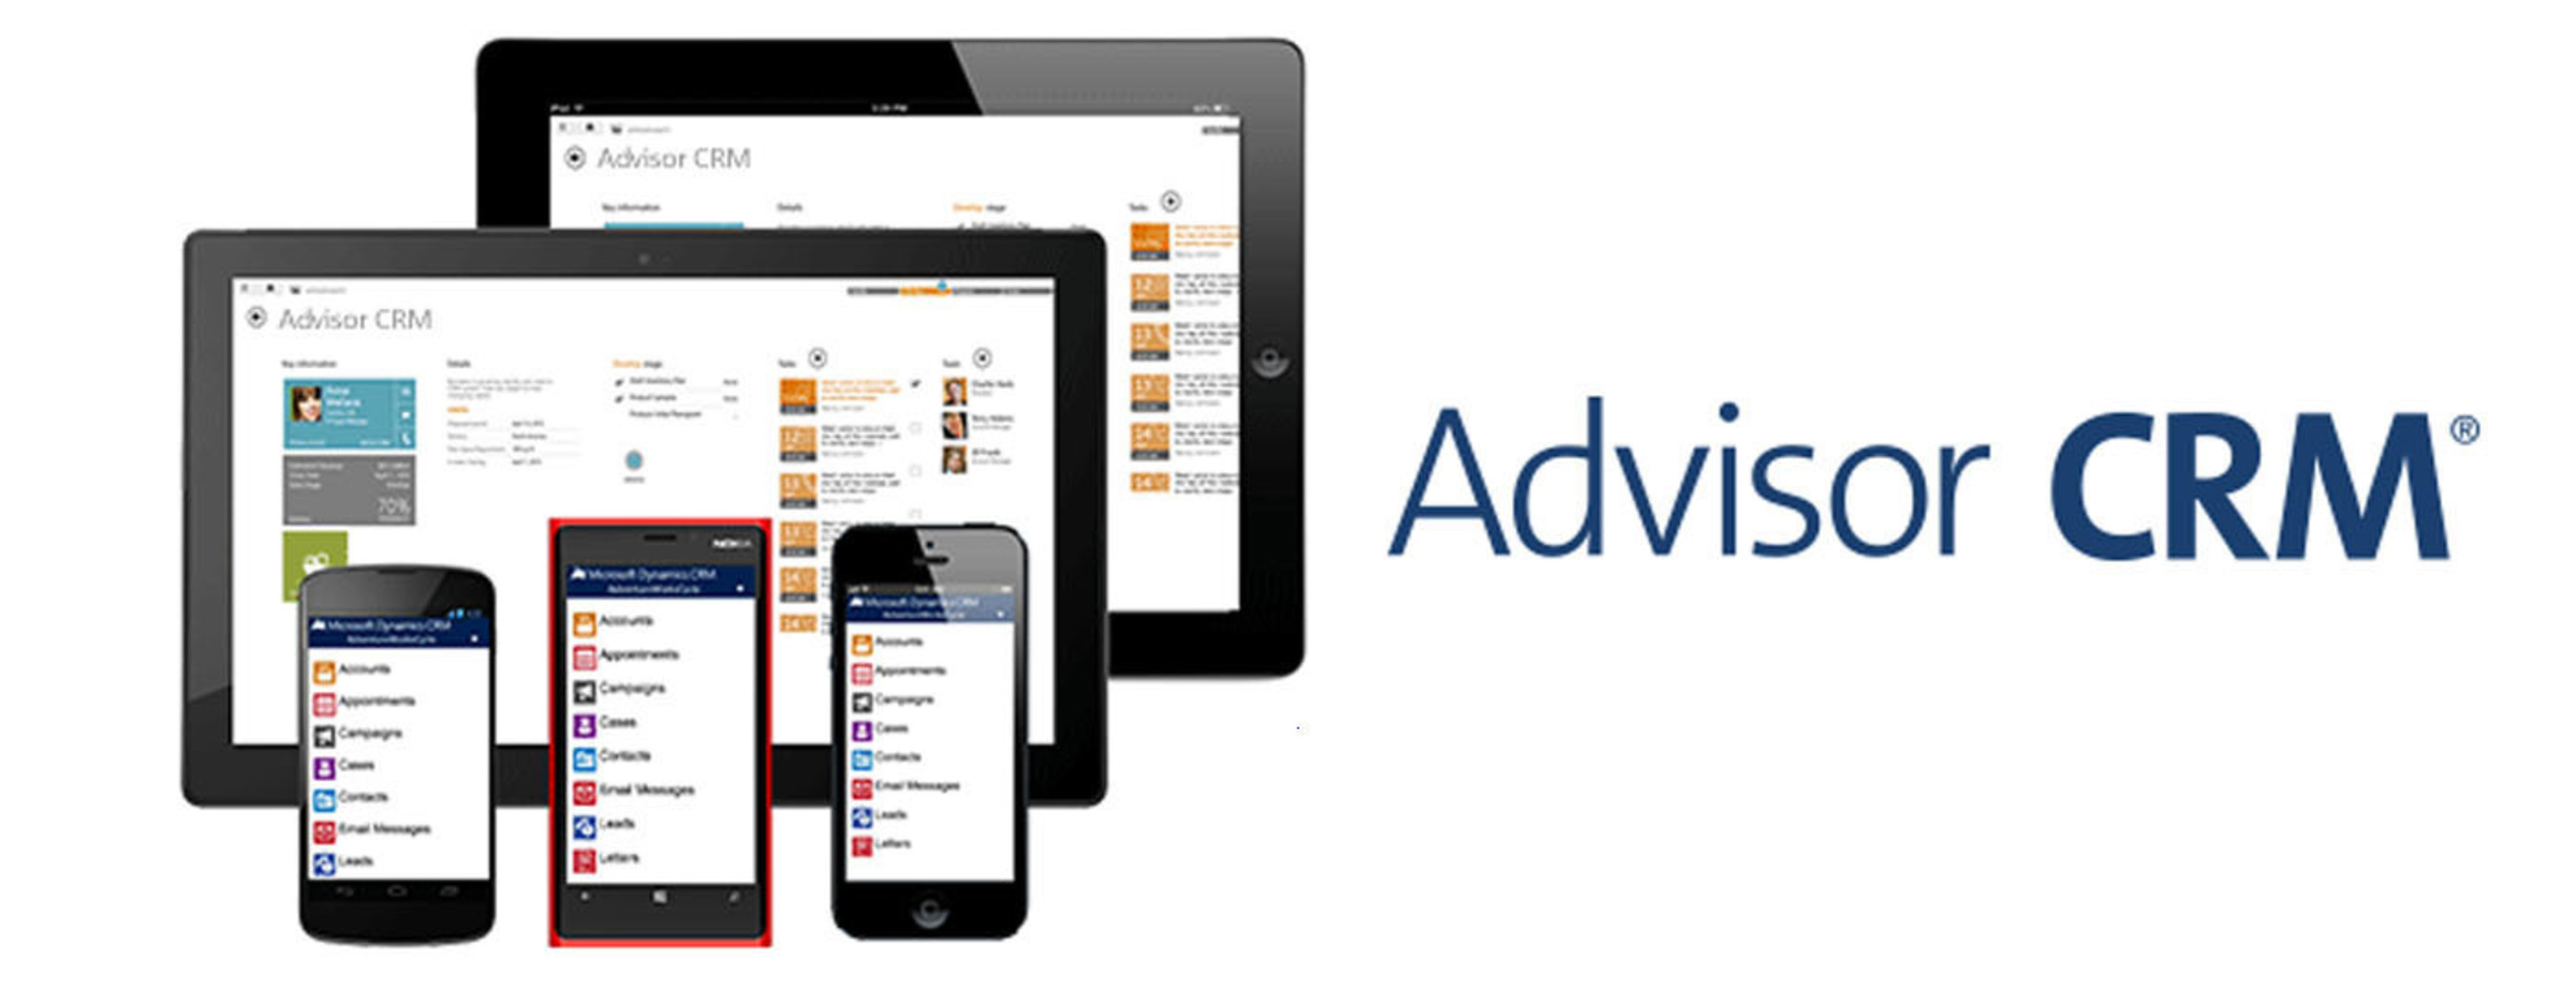 The new version of Advisor CRM(R) includes a mobile application that connects advisors to their client accounts and critical financial account data, and allows them to make updates and send messages, from any location. Advisor CRM is a web-based client relationship management (CRM) system designed for independent RIAs and modeled around a client's lifecycle. For more information visit: www.tamaracinc.com. (PRNewsFoto/Envestnet | Tamarac)